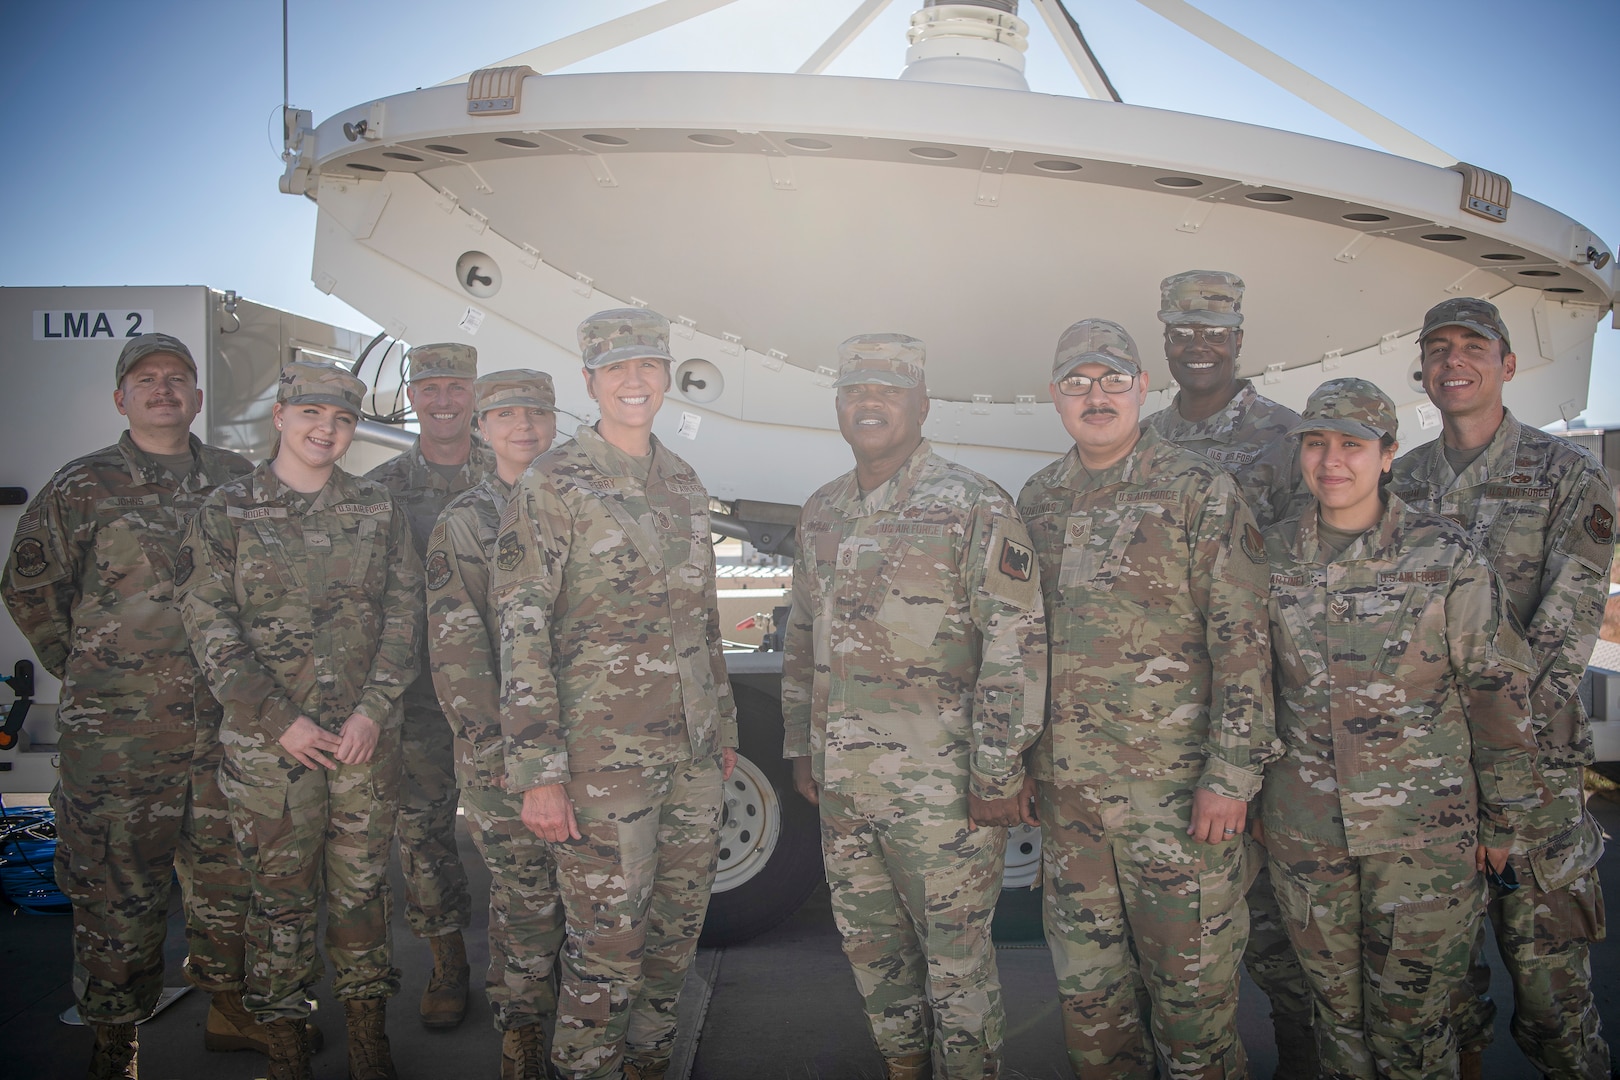 Senior Enlisted Advisor Tony Whitehead, center right, the SEA to the chief of the National Guard Bureau, stands with Command Chief Master Sgt. Lisa Perry, the Colorado National Guard’s command senior enlisted leader, and members of the Colorado Guard’s 138th Space Control Squadron on Schriever Space Force Base, Colorado, June 28, 2022. Whitehead visited Colorado Guard space and missile defense units in Colorado Springs to see how National Guard members are contributing to these expanding domains.